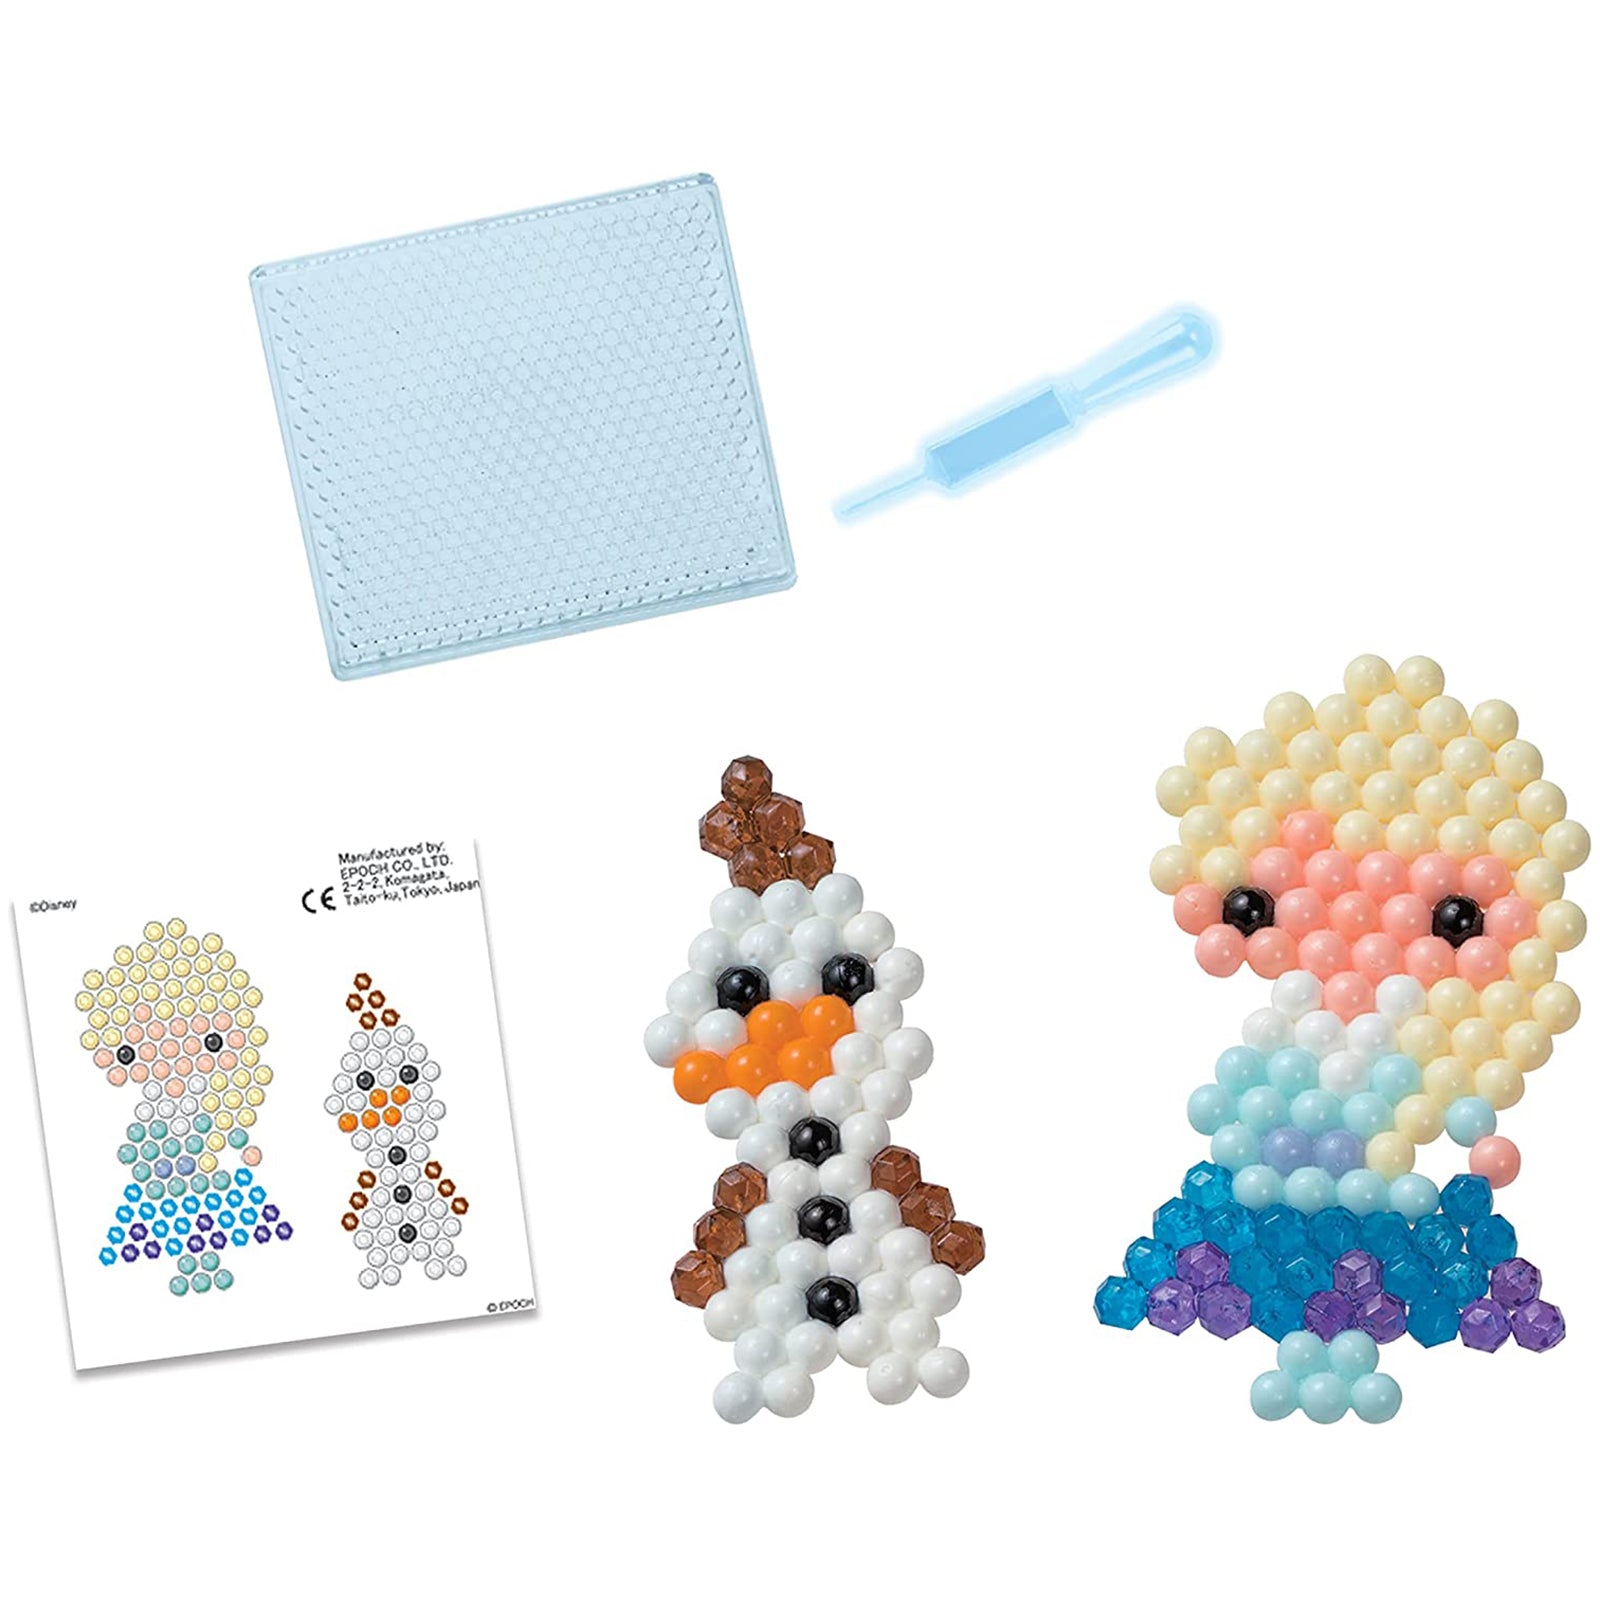 Aquabeads - Frozen 2 Play Pack